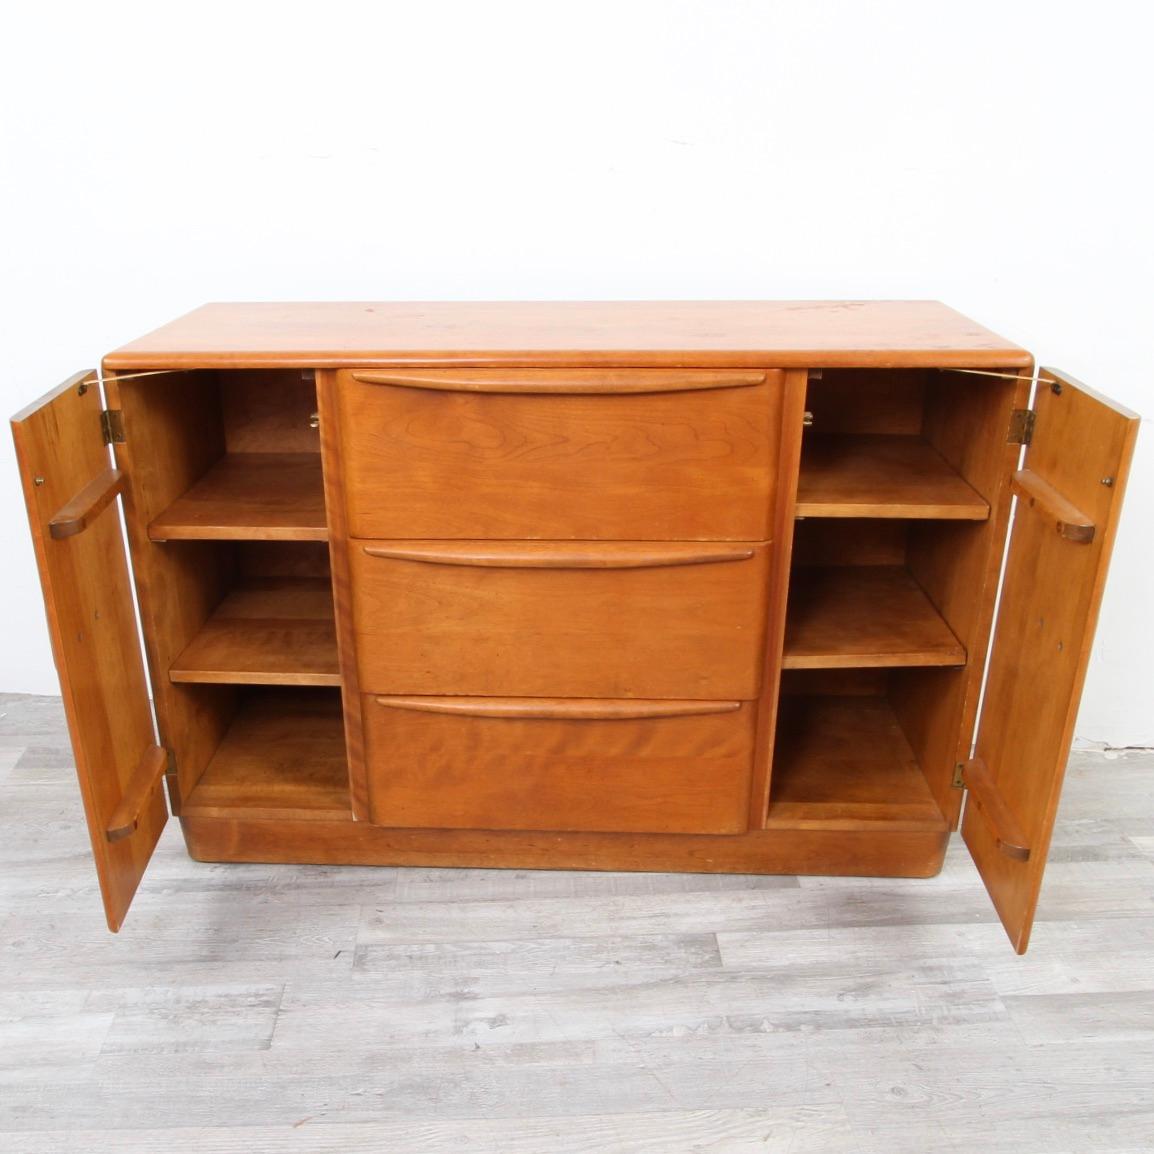 American Heywood Wakefield Isabel Credenza in Wheat, c1950 For Sale